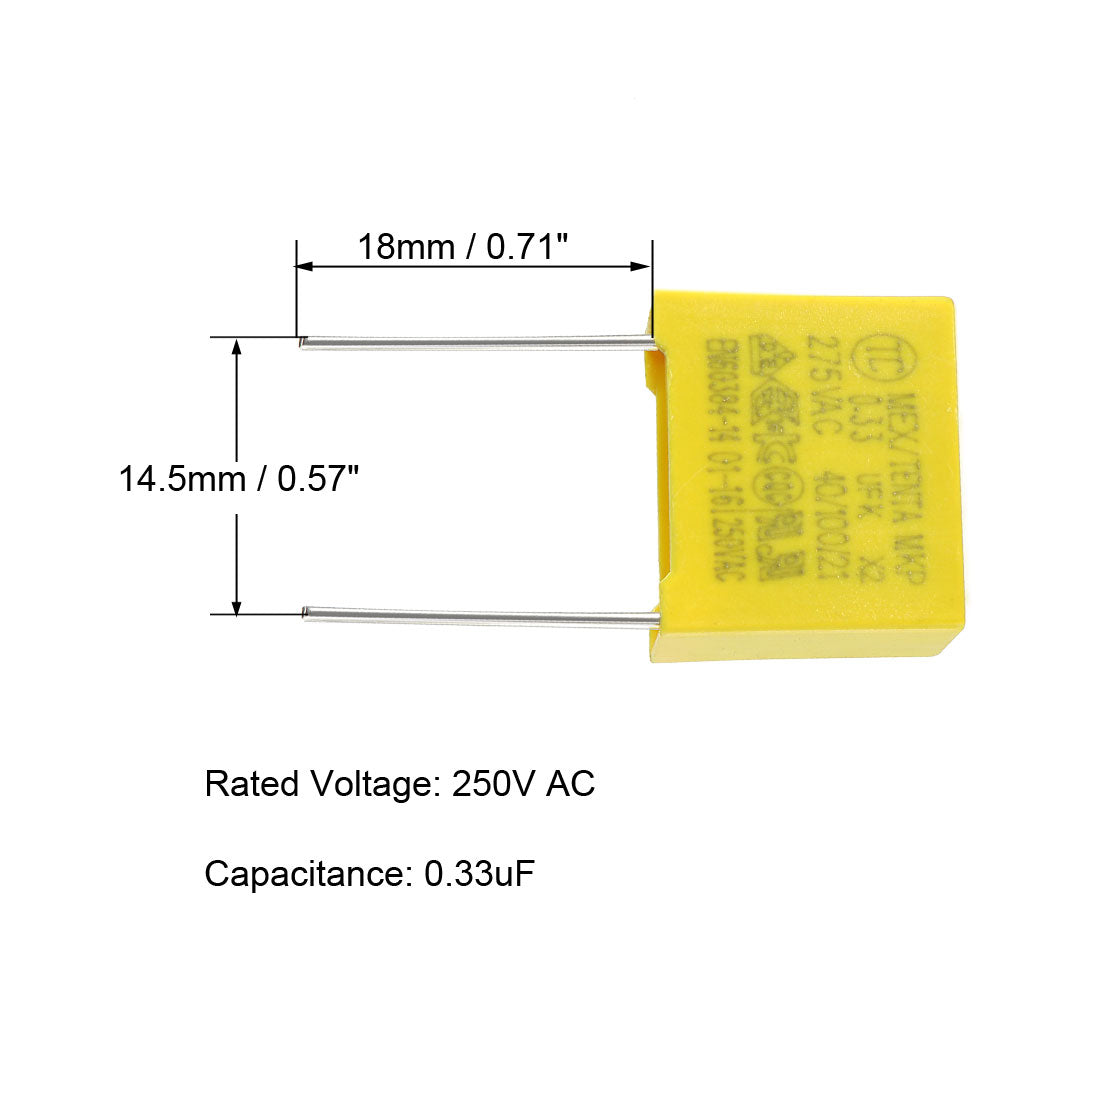 uxcell Uxcell Safety Capacitors Polypropylene Film 0.33uF 275VAC X2 MKP 5 Pcs